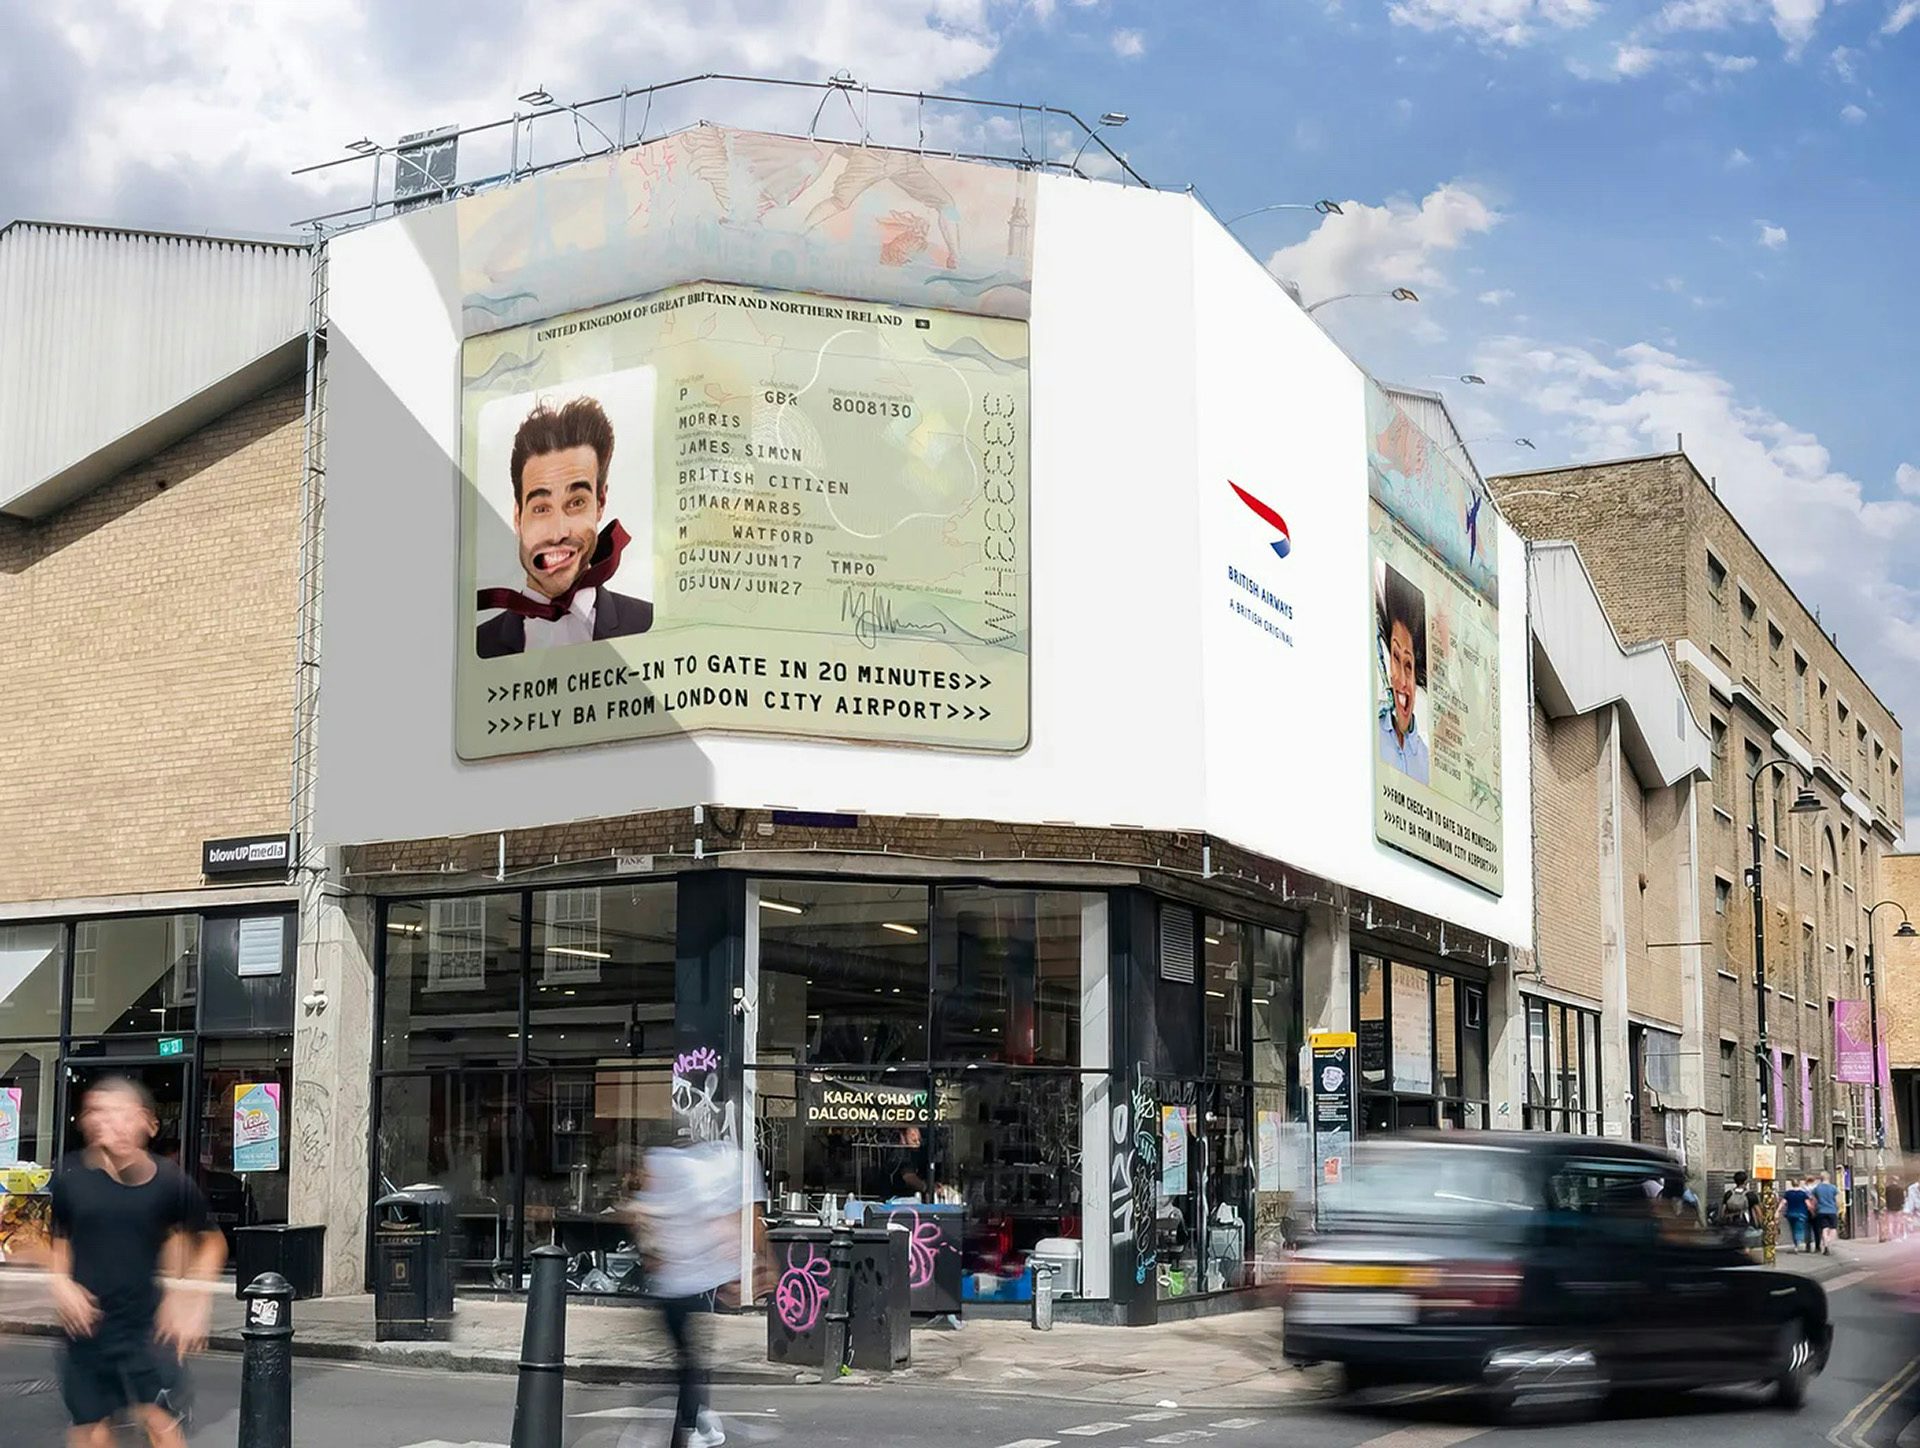 Image shows a British Airways advert on the side of a building showing an edited passport page, featuring a passport photo of a person with their mouth blown wide open